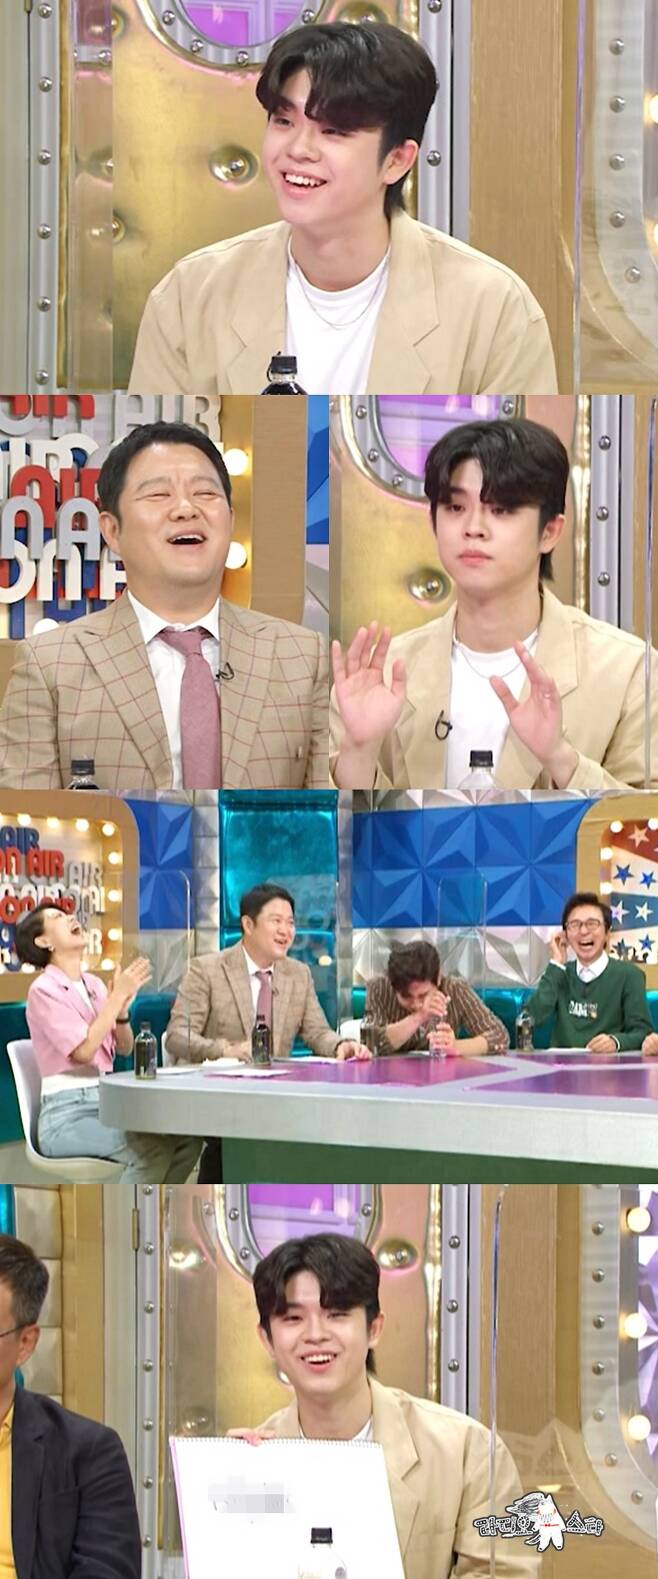 Rapper Grie will appear on Radio Star to reveal the recent 17kg increase after 13kg weight loss.MBC entertainment program Radio Star, which will be broadcast on the 23rd, will be featured in Hey, You Can Buy Two, starring Kim Bo-sung, Kim Pro- (Kim Dong-hwan), Gri and Shin A-young.The truth surrounding the weight increase among the drawing Yoyo and bulk-ups that have experienced storm loss and increase in a short time to draw on this day will be revealed.Grie, who is on the rise as a new fool character in entertainment, will draw attention by saying that he dreams of India independence from his father Kim Gu.Fathers intellectual image has been exaggerated, said Dr. Grie, who is on the third radio star. He plays the role of laughing cheery with the sniper comment and the sense of entertainment that holds up entertainment veteran Kim Gu.First, he reveals the recent situation of collecting topics, saying, I lost 13kg and then increased 17kg.Many people wonder if he was hit by Yoyo or succeeded in bulk-up, thanks to the short time of storm loss and increase.It reveals the truth about the weight increase and tells the effect after the increase.In particular, after the weight increase, the headline changed, saying, The son of Kim Gu followed me, but nowadays I have a new modifier called 17kg steam.Share 3 months, COIN A month after the Financial Poshiragi drawing, Father shared Share information only to me, he said, revealing the love of his father Kim Gu through financial technology.Share, which is drawn, rolls its feet even if it falls a little, but COIN tells its own business philosophy that is relaxed even if it is minus 30%.Kim Gu, who listened to his sons investment theory, is said to be unable to hide his puzzled expression, making him more curious about his story.Drawing, who is active as a new fool character full of pure beauty in various entertainments, says that he only dreams of Indian independence before going to the army.In the meantime, it is said that the recently released new song Spring Takes is making Kim Gu happy by telling a news that it is a chart on the main music source site.He said, I wanted to help my mothers business, but he did not have a one-sided ceremony. However, he will catch the attention by telling the story of calling Hong Jin-kyung and Kim Soo-mi, who are doing kimchi business.MBC Radio Star will be broadcast at 10:20 pm on the 23rd.=